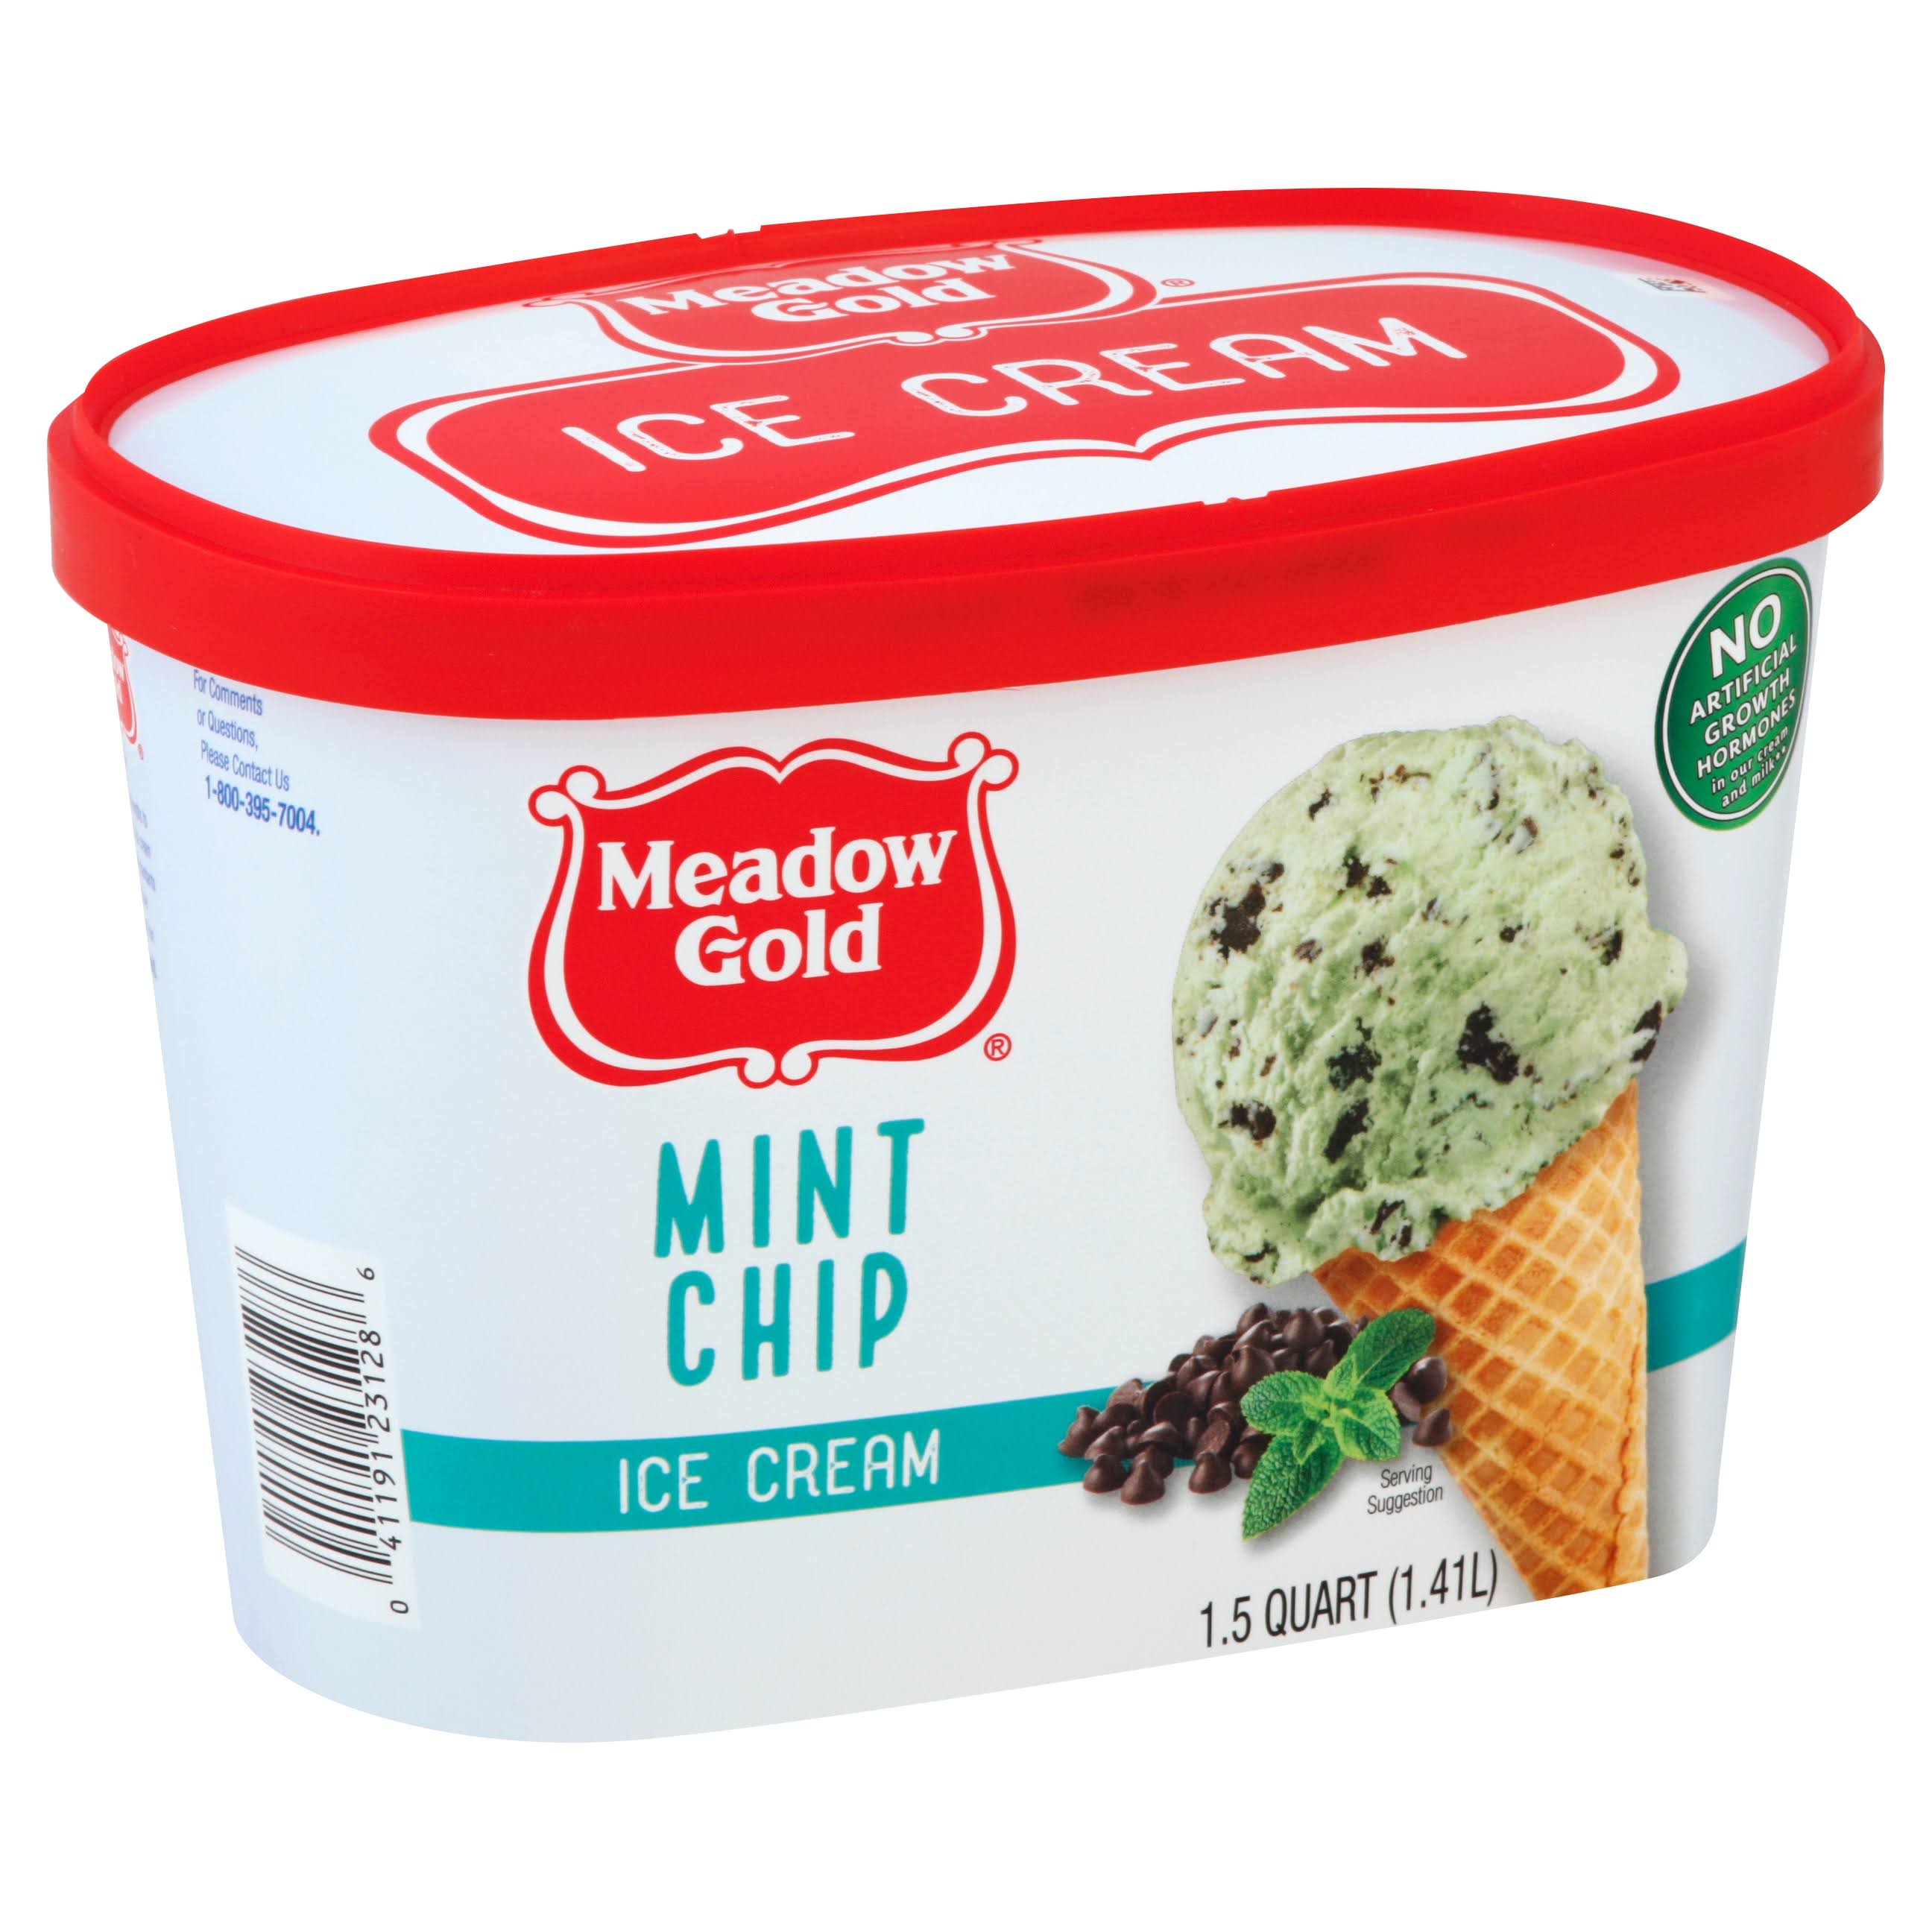 Meadow Gold Ice Cream - Mint Chocolate Chip, 1.5qt